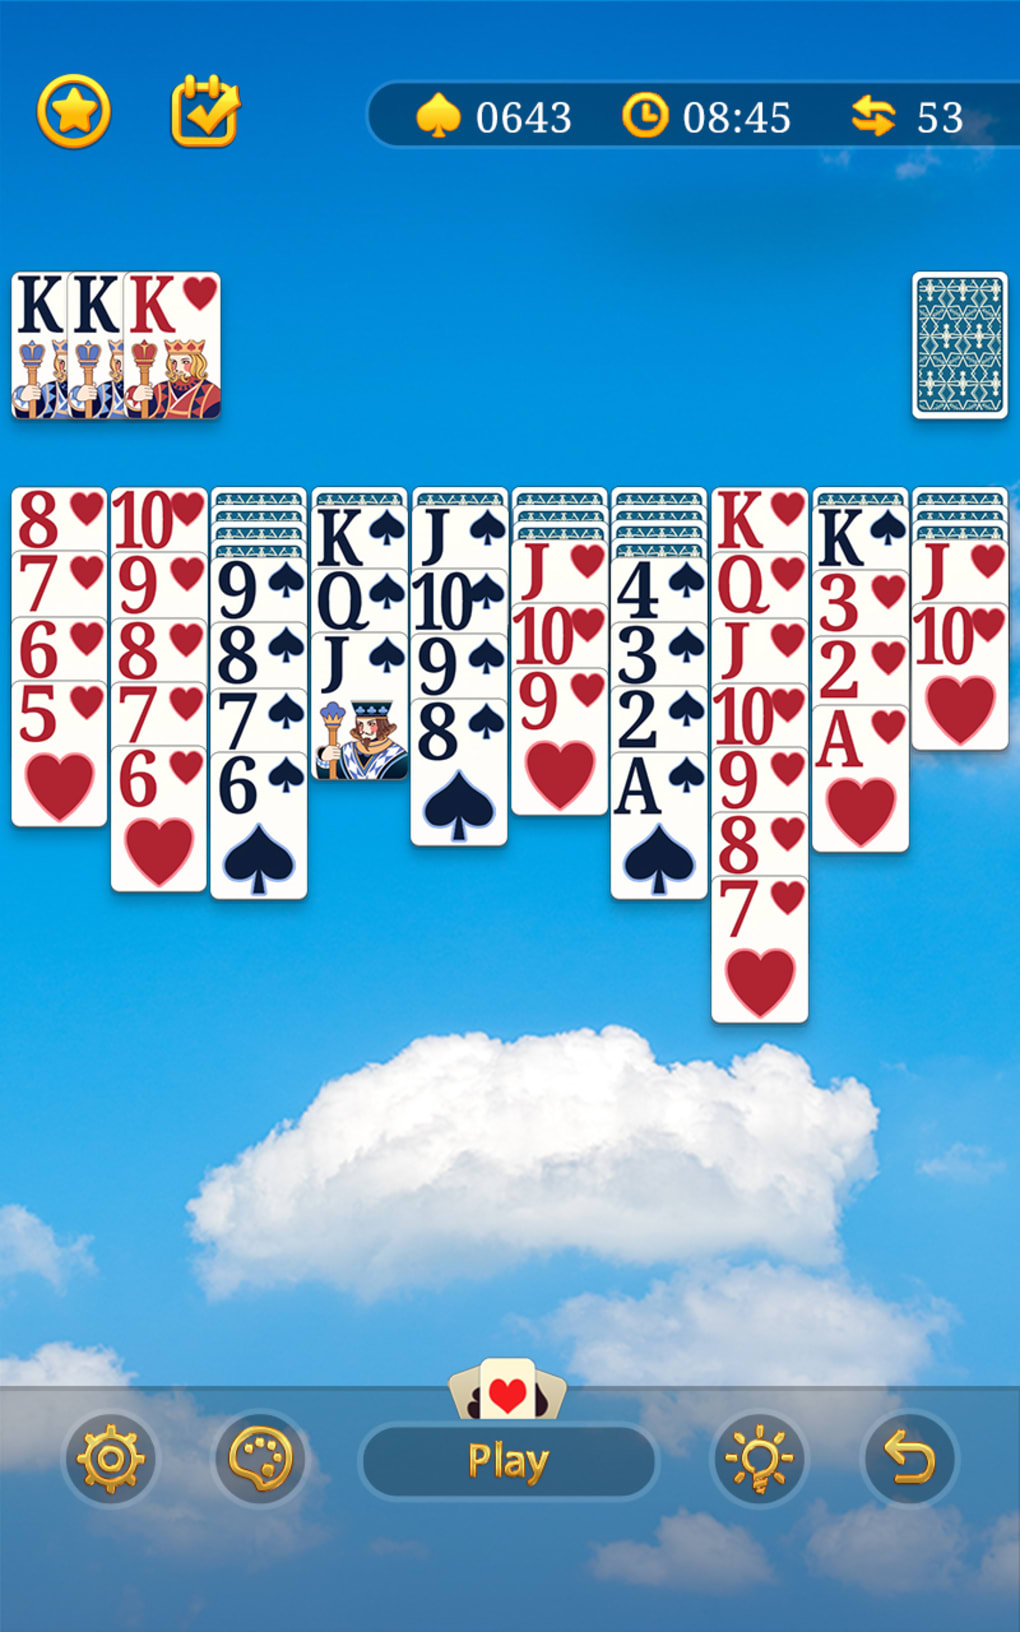 Spider Solitaire - Cards Game APK for Android Download